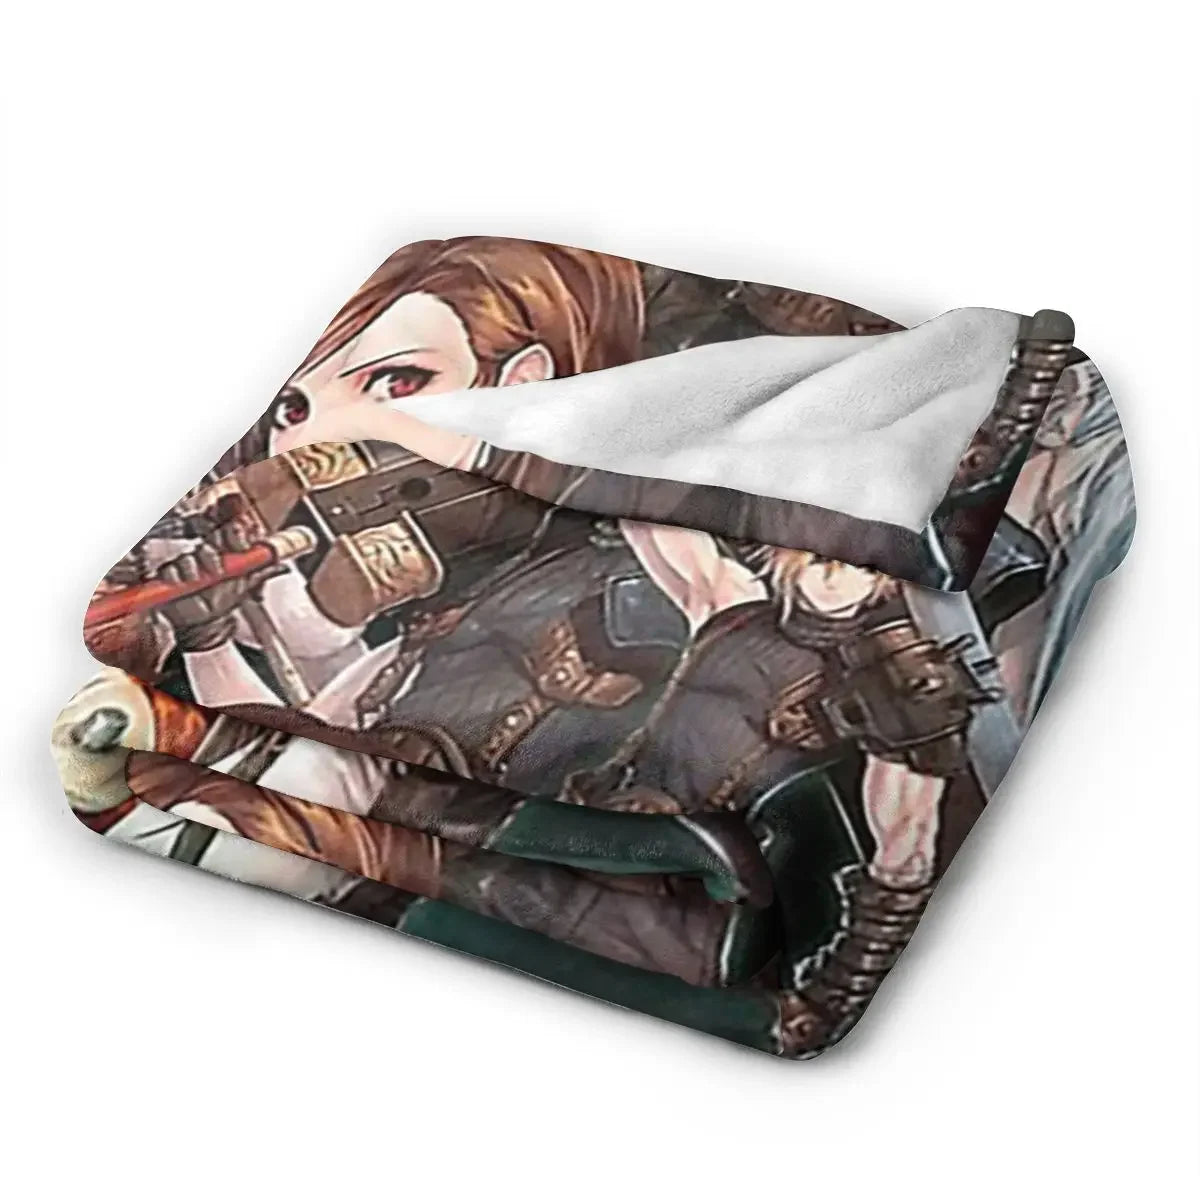 Final Fantasy VII Characters Background Blankets Soft Warm Flannel Throw Blanket Bedding for Bed Living room Picnic Travel Couch